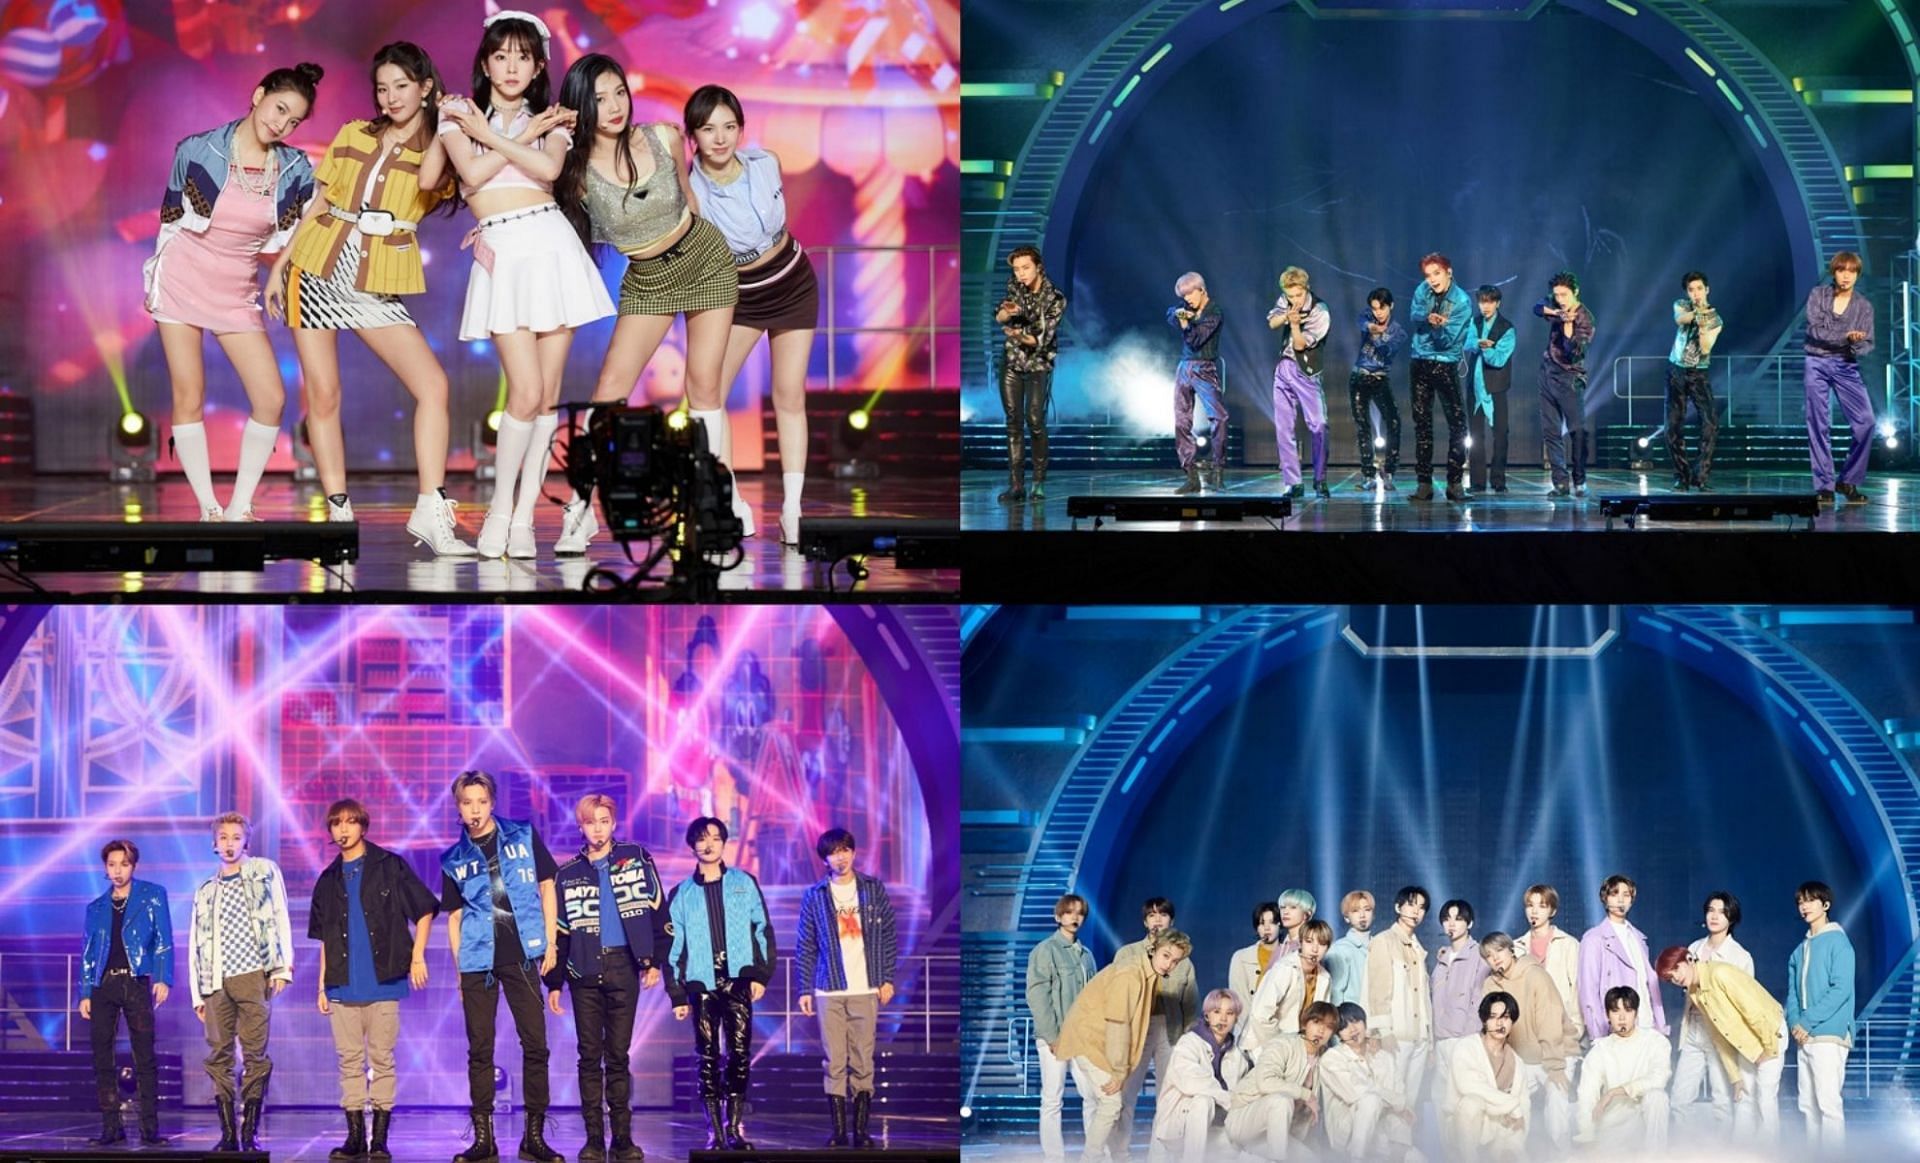 SMTOWN LIVE 2022 concert pictures (Image via @SMTOWNGLOBAL/Twitter)